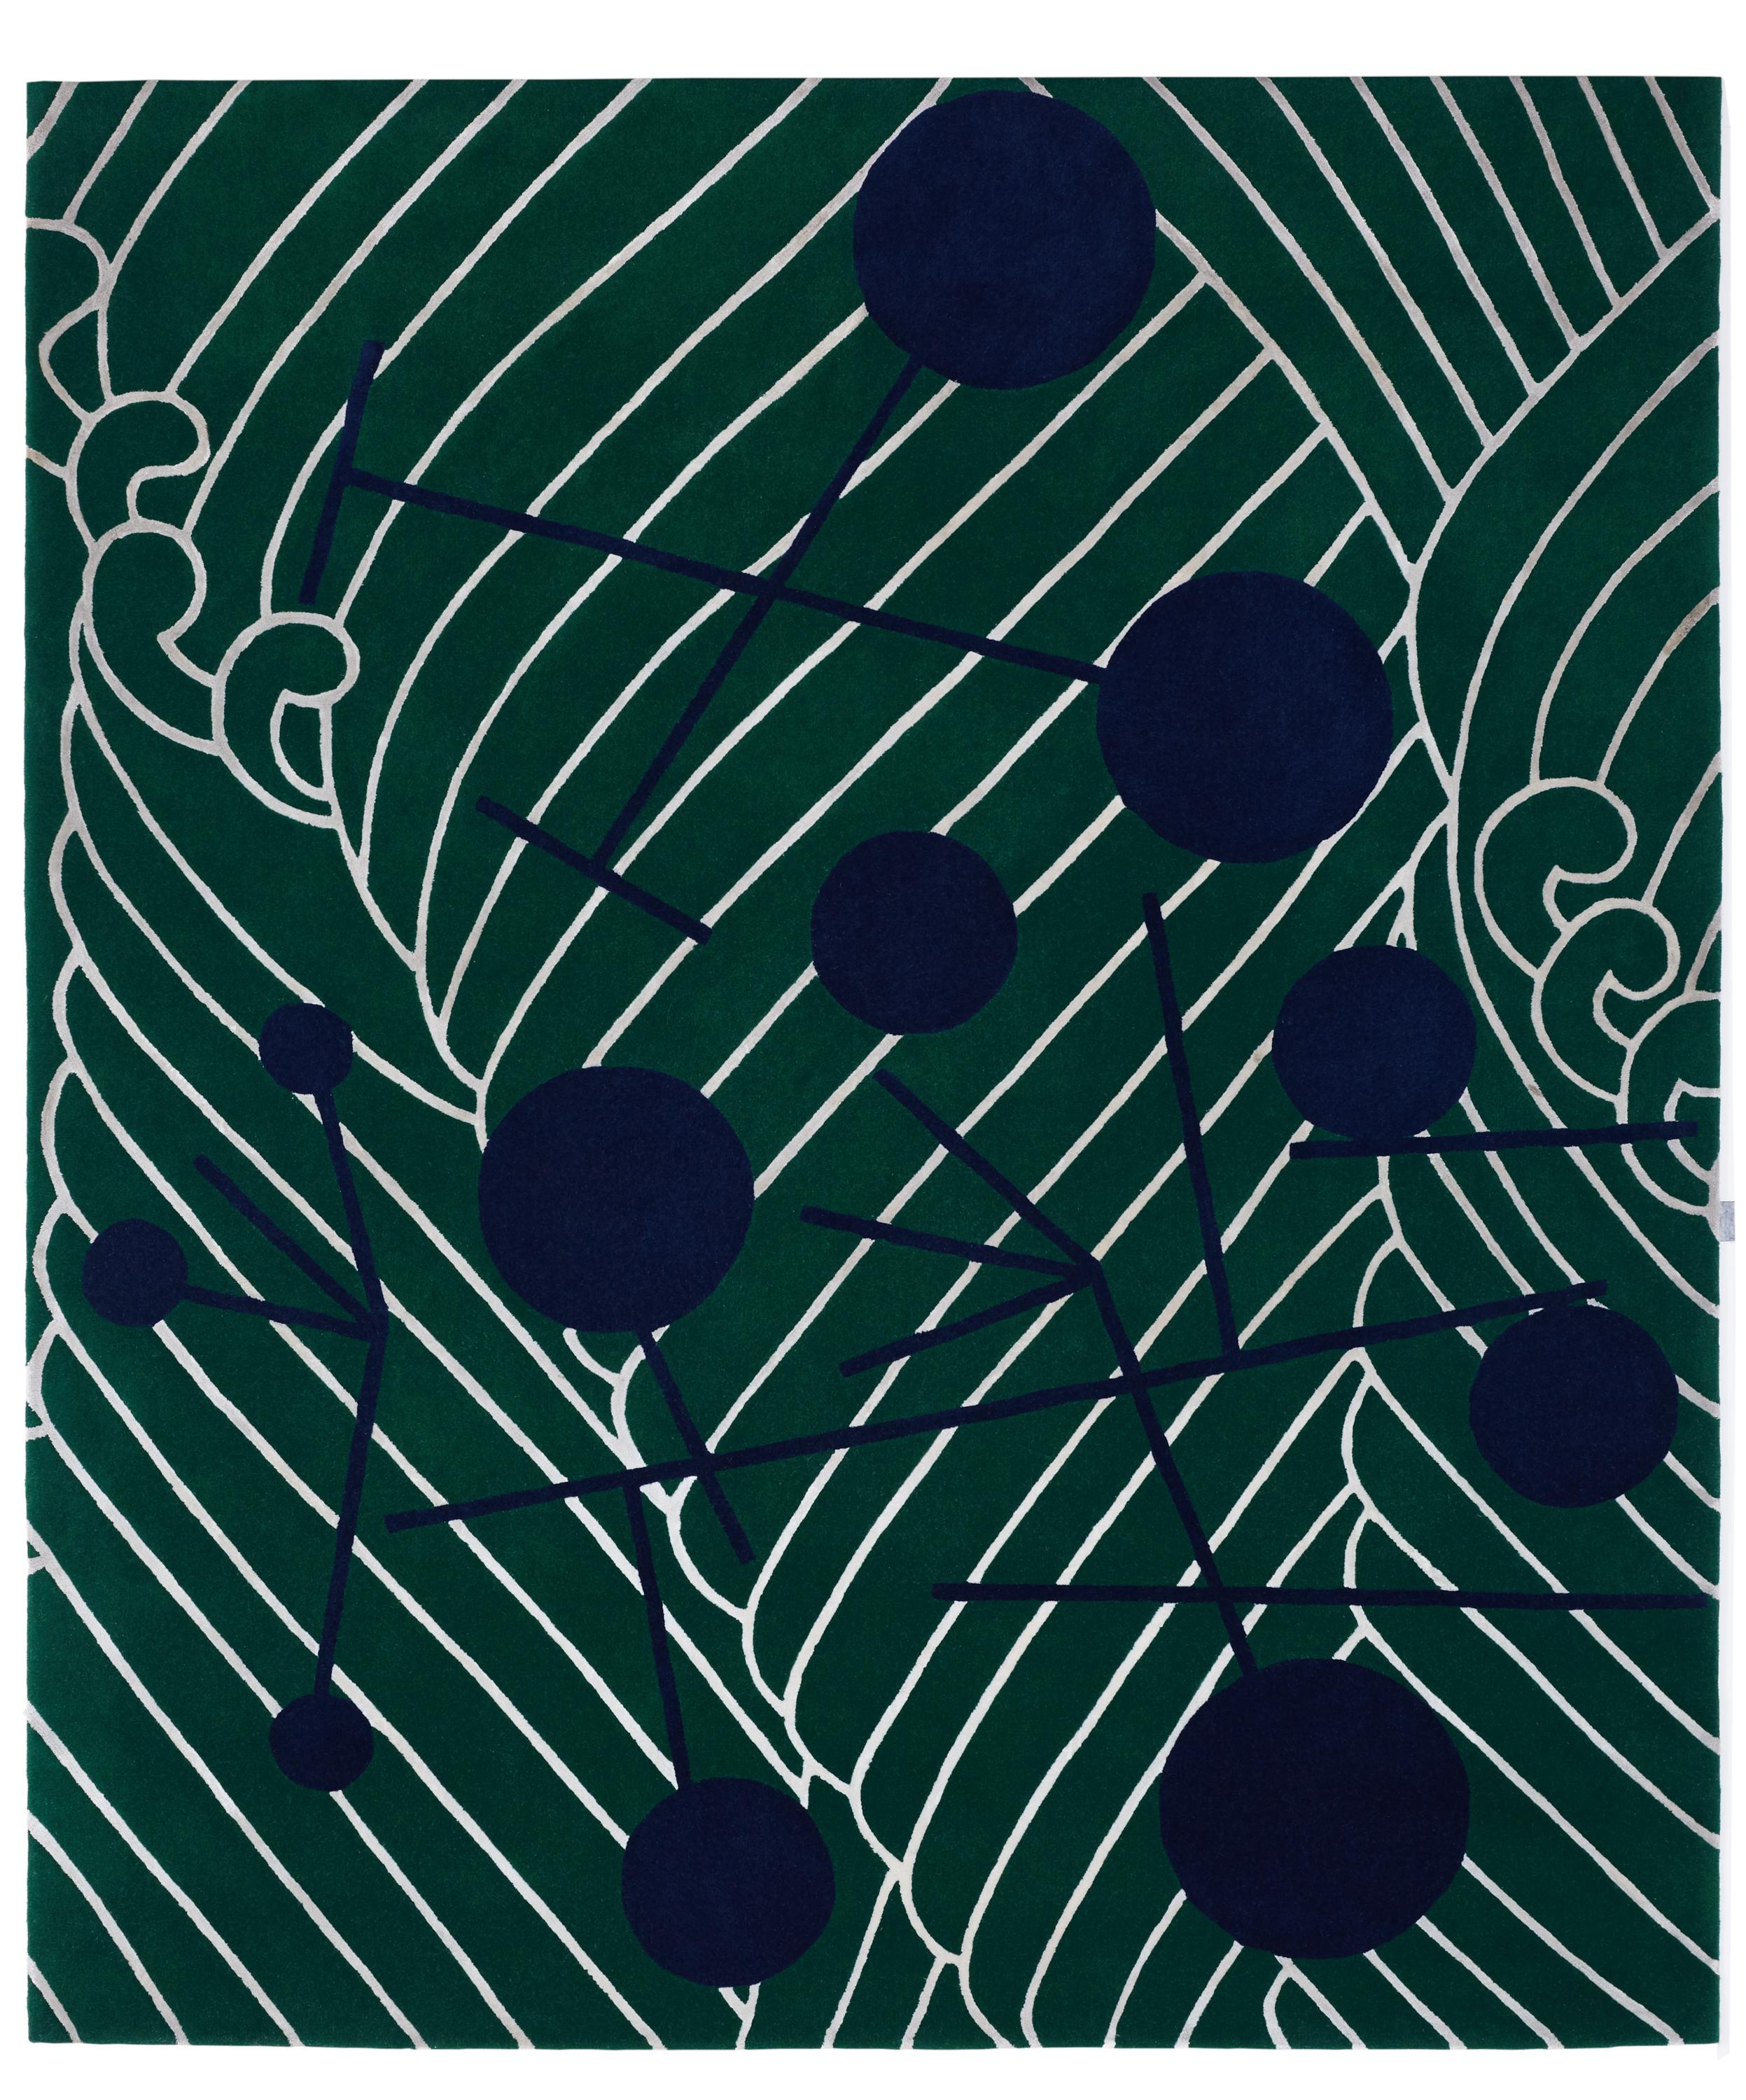 Abstract Dadaist contemporary rug inspired by Sophie Taeuber Arp
Artist: Sophie Taeuber Arp
Dimensions: W 170, D 240 cm
New-Zealand wool and silk

Japanese Abstractions is a collection of nine pieces, all designed around the concept of the